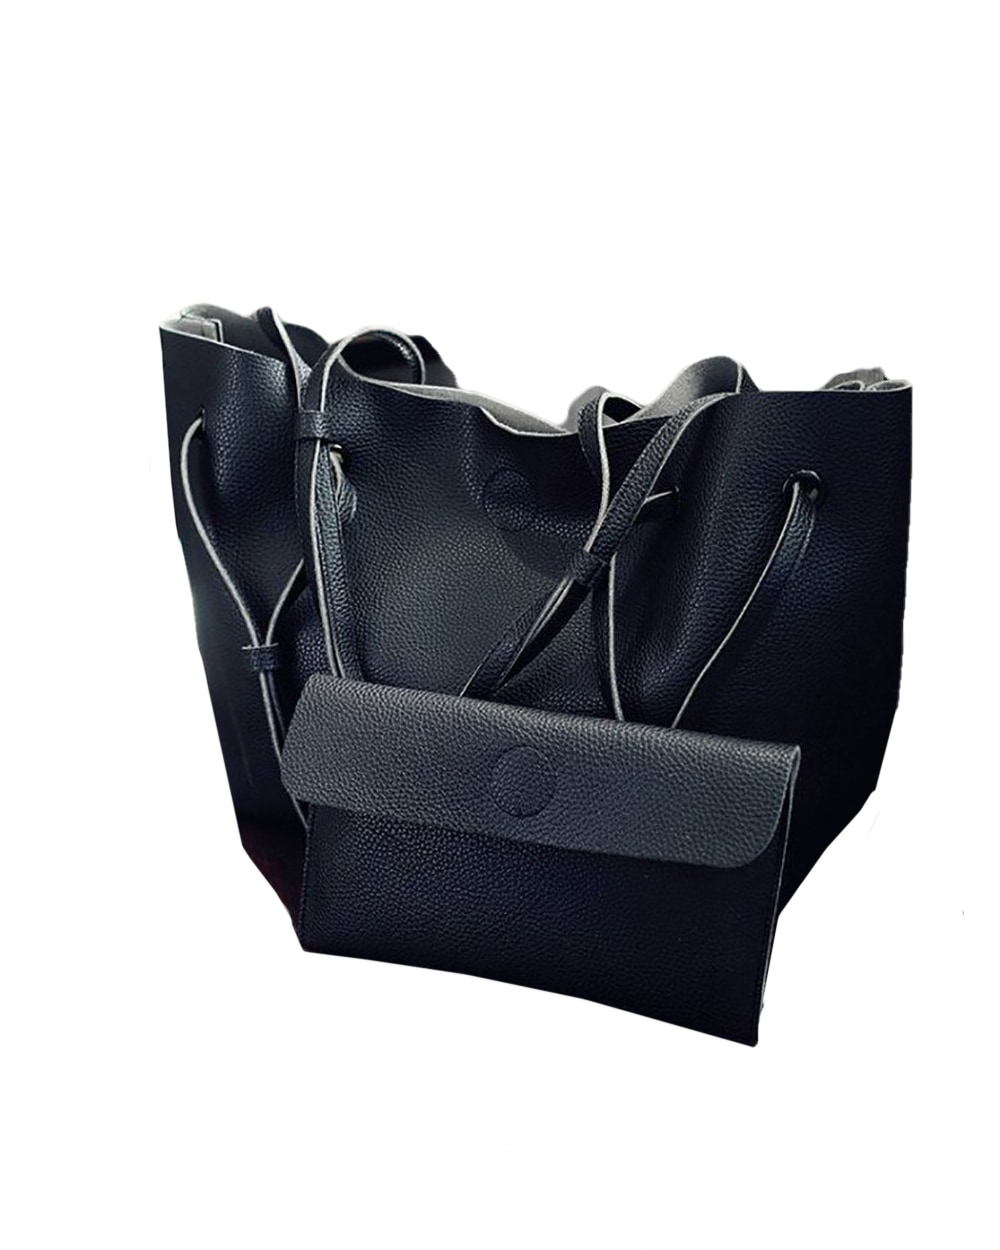 black faux leather tote bag